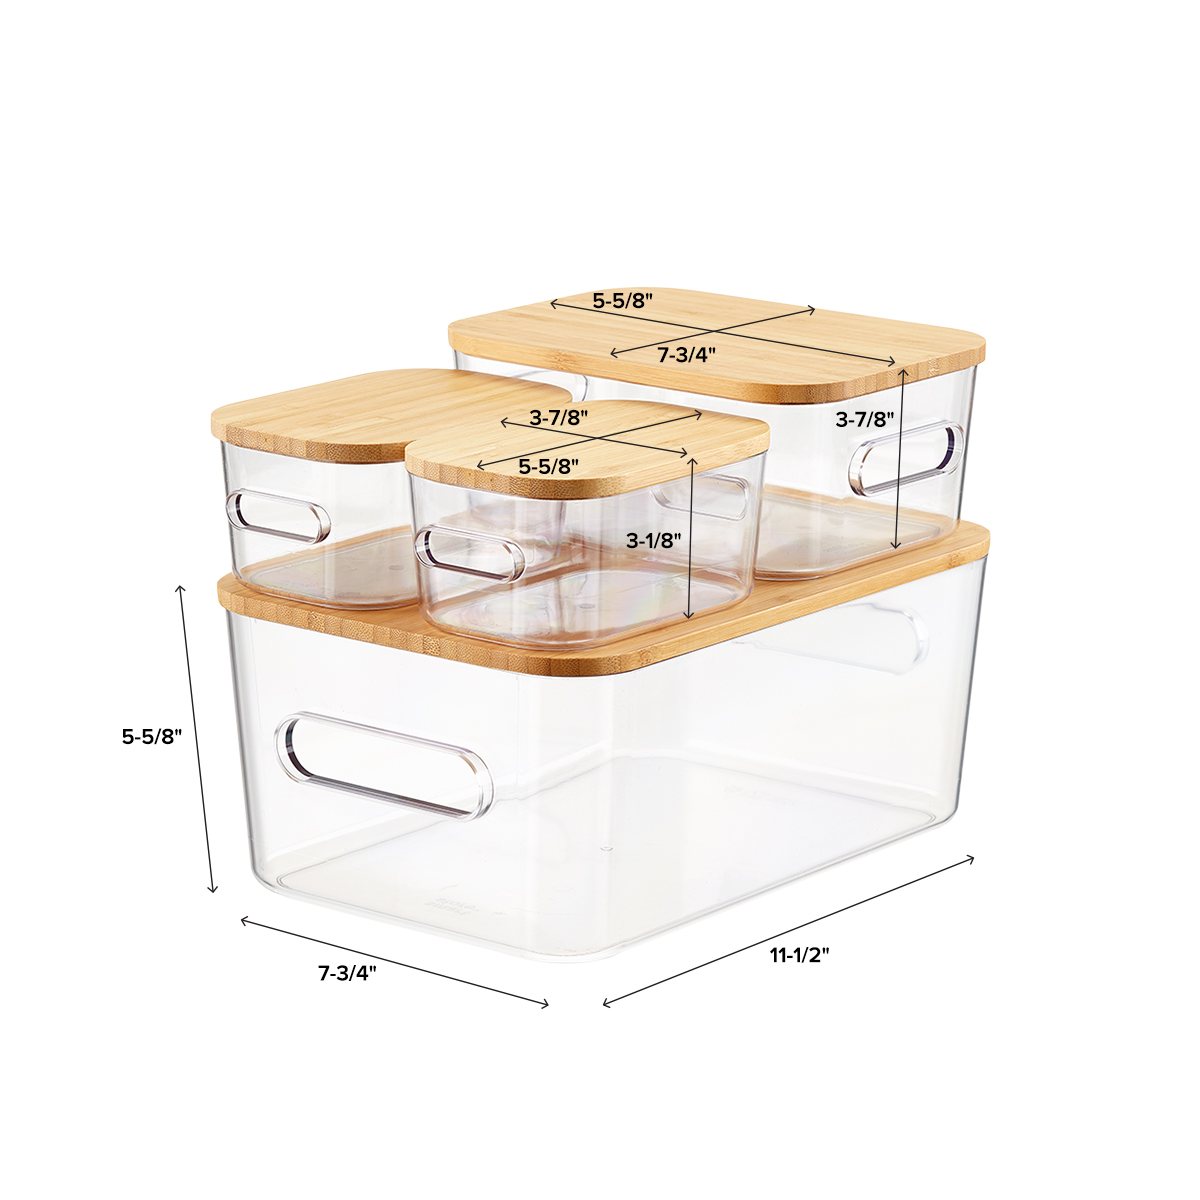 Tidy & Co. Set of 4 Stackable Storage Bins w/ Bamboo Lids 